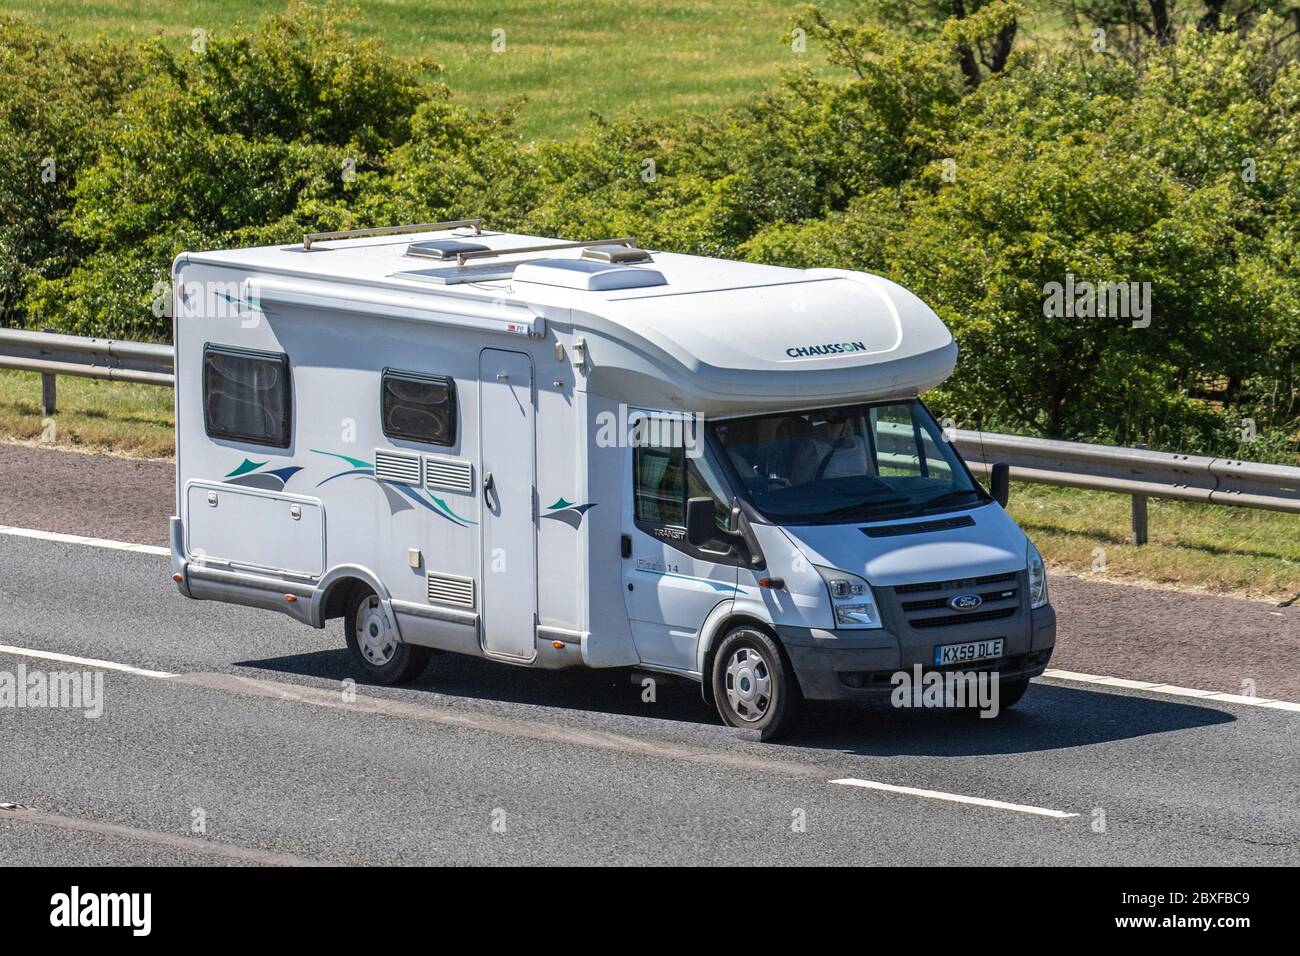 Ford Transit Flash 14 Chausson Touring Caravans and Motorhomes, campervans,  RV leisure vehicle, family holidays, caravanette vacations, caravan  holiday, life on the road Stock Photo - Alamy